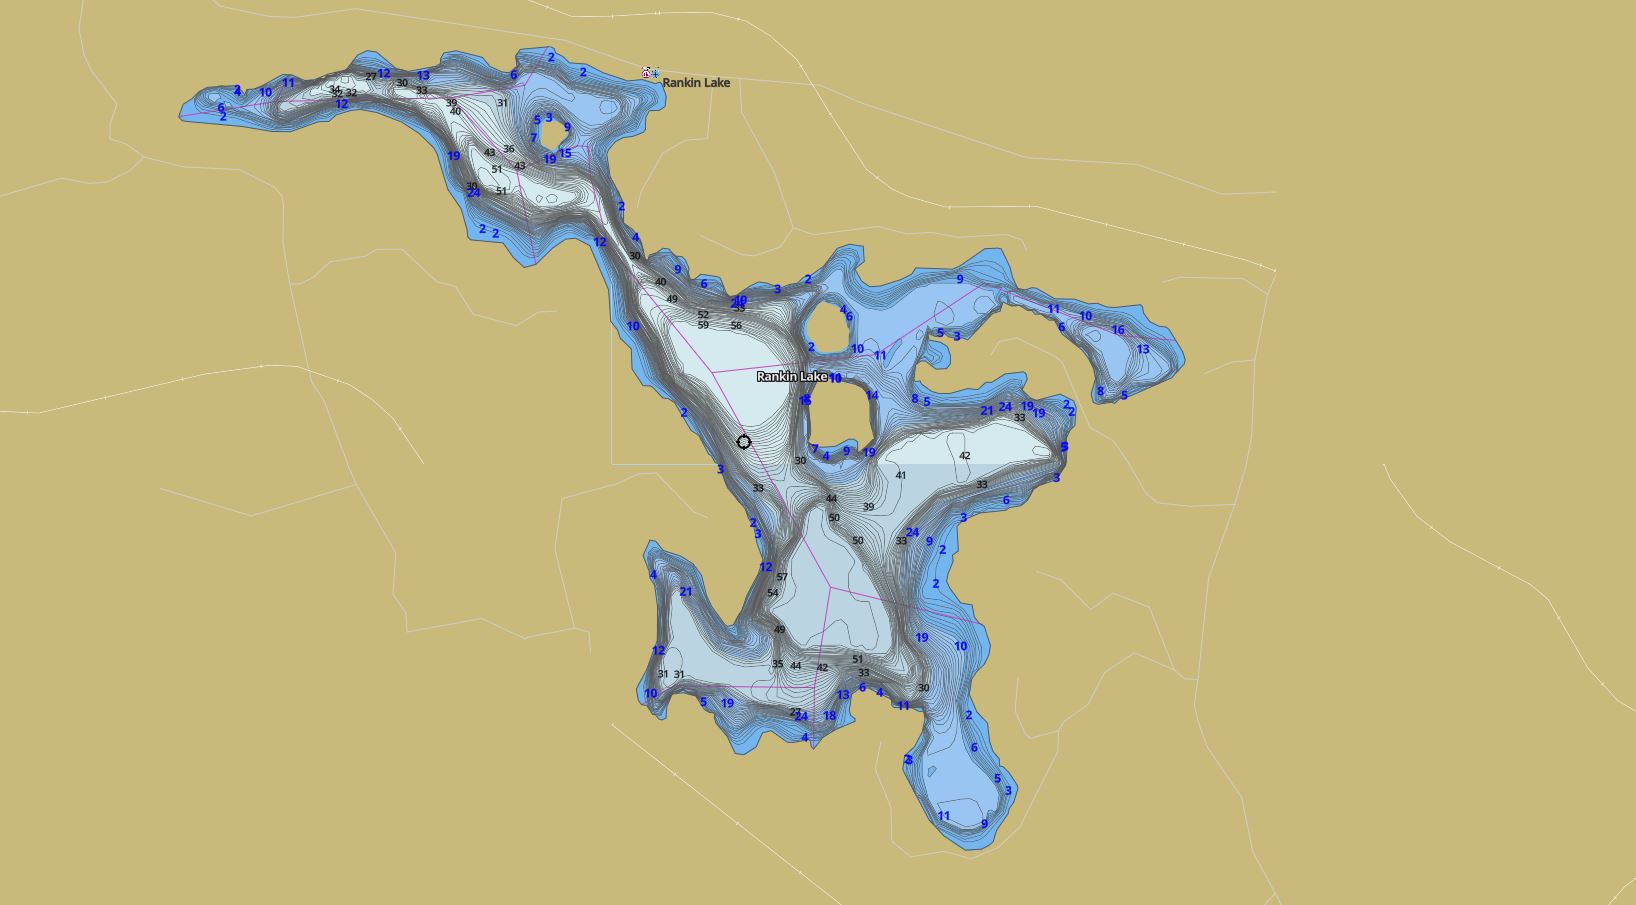 Contour Map of Rankin Lake in Municipality of Seguin and the District of Parry Sound